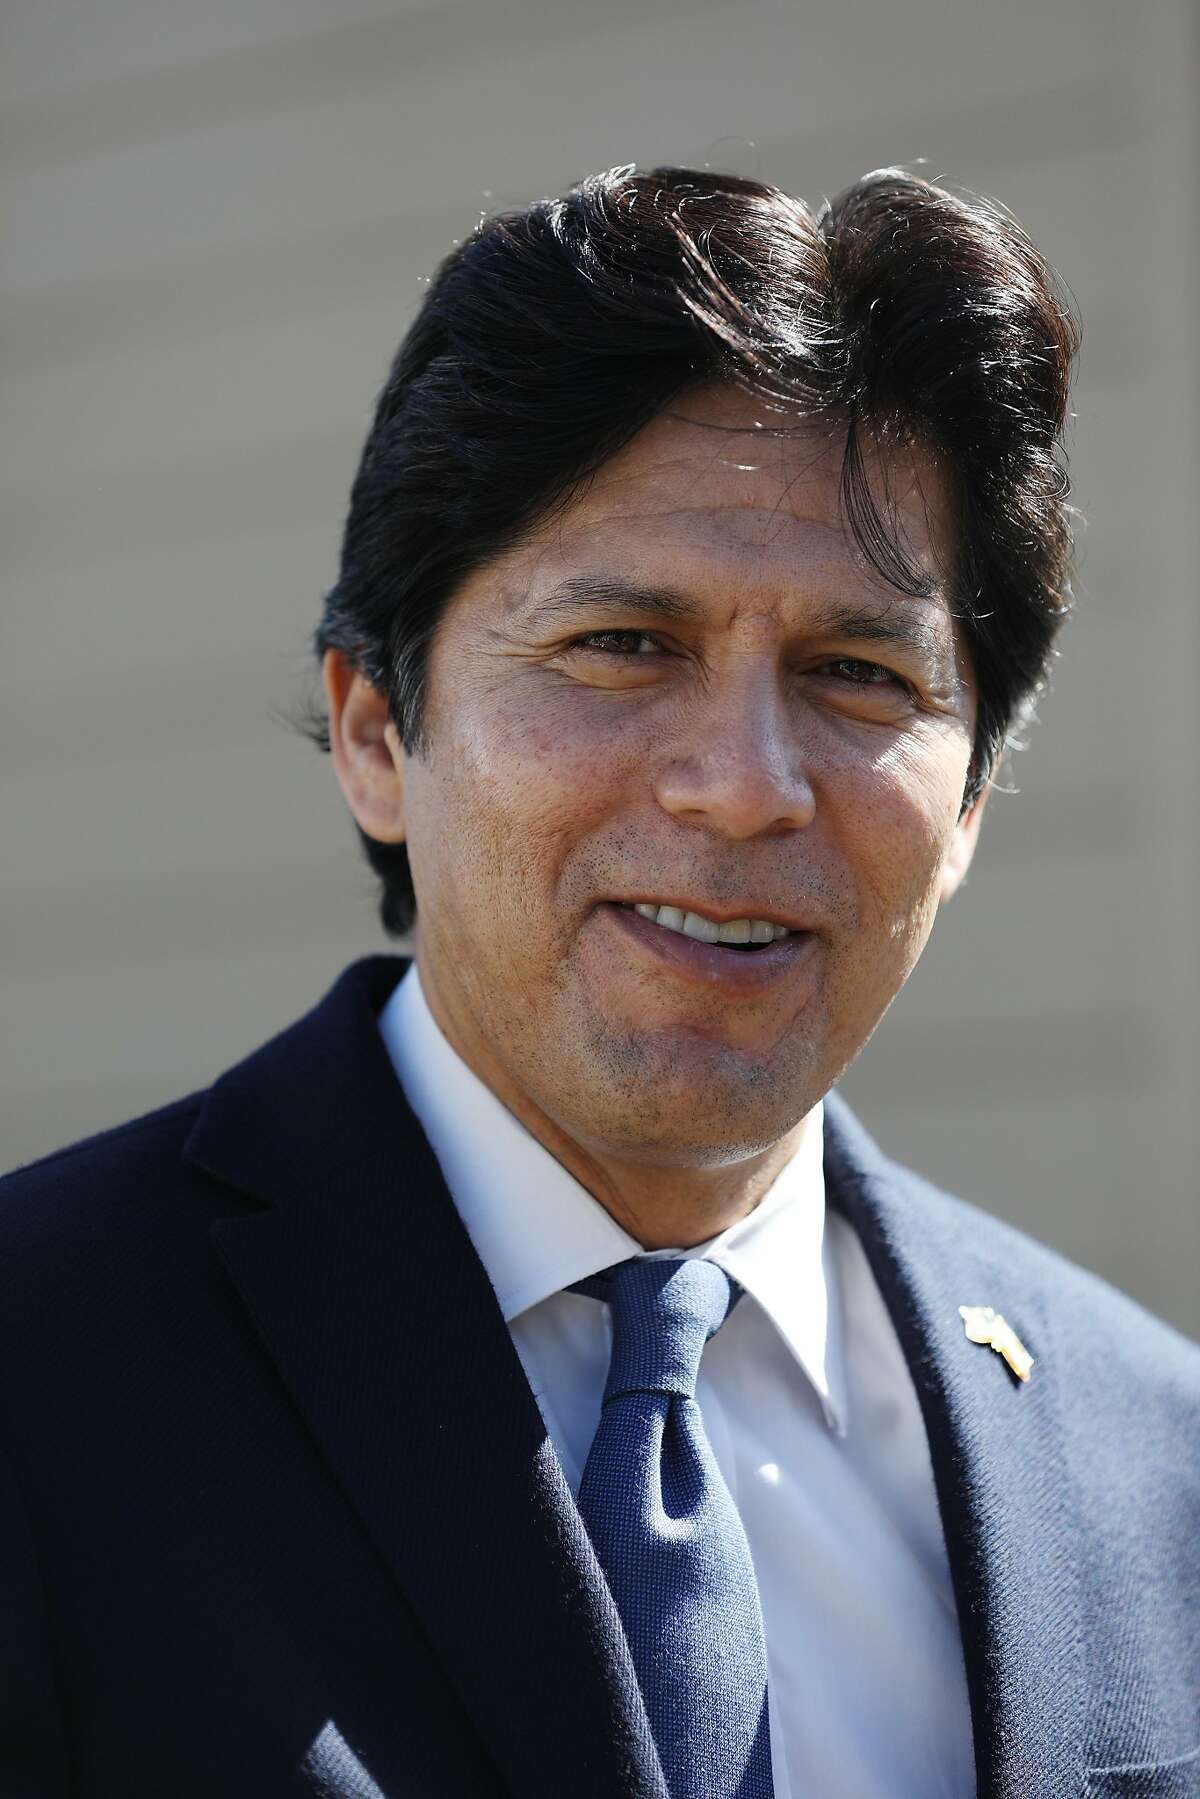 California State Senator Kevin de Leon is seen before he speaks at the Global Climate Action Summit Event: Spotlight on California's Leadership in Equitable Clean Energy Solutions on Tuesday, September 11, 2018 in San Francisco, Calif.